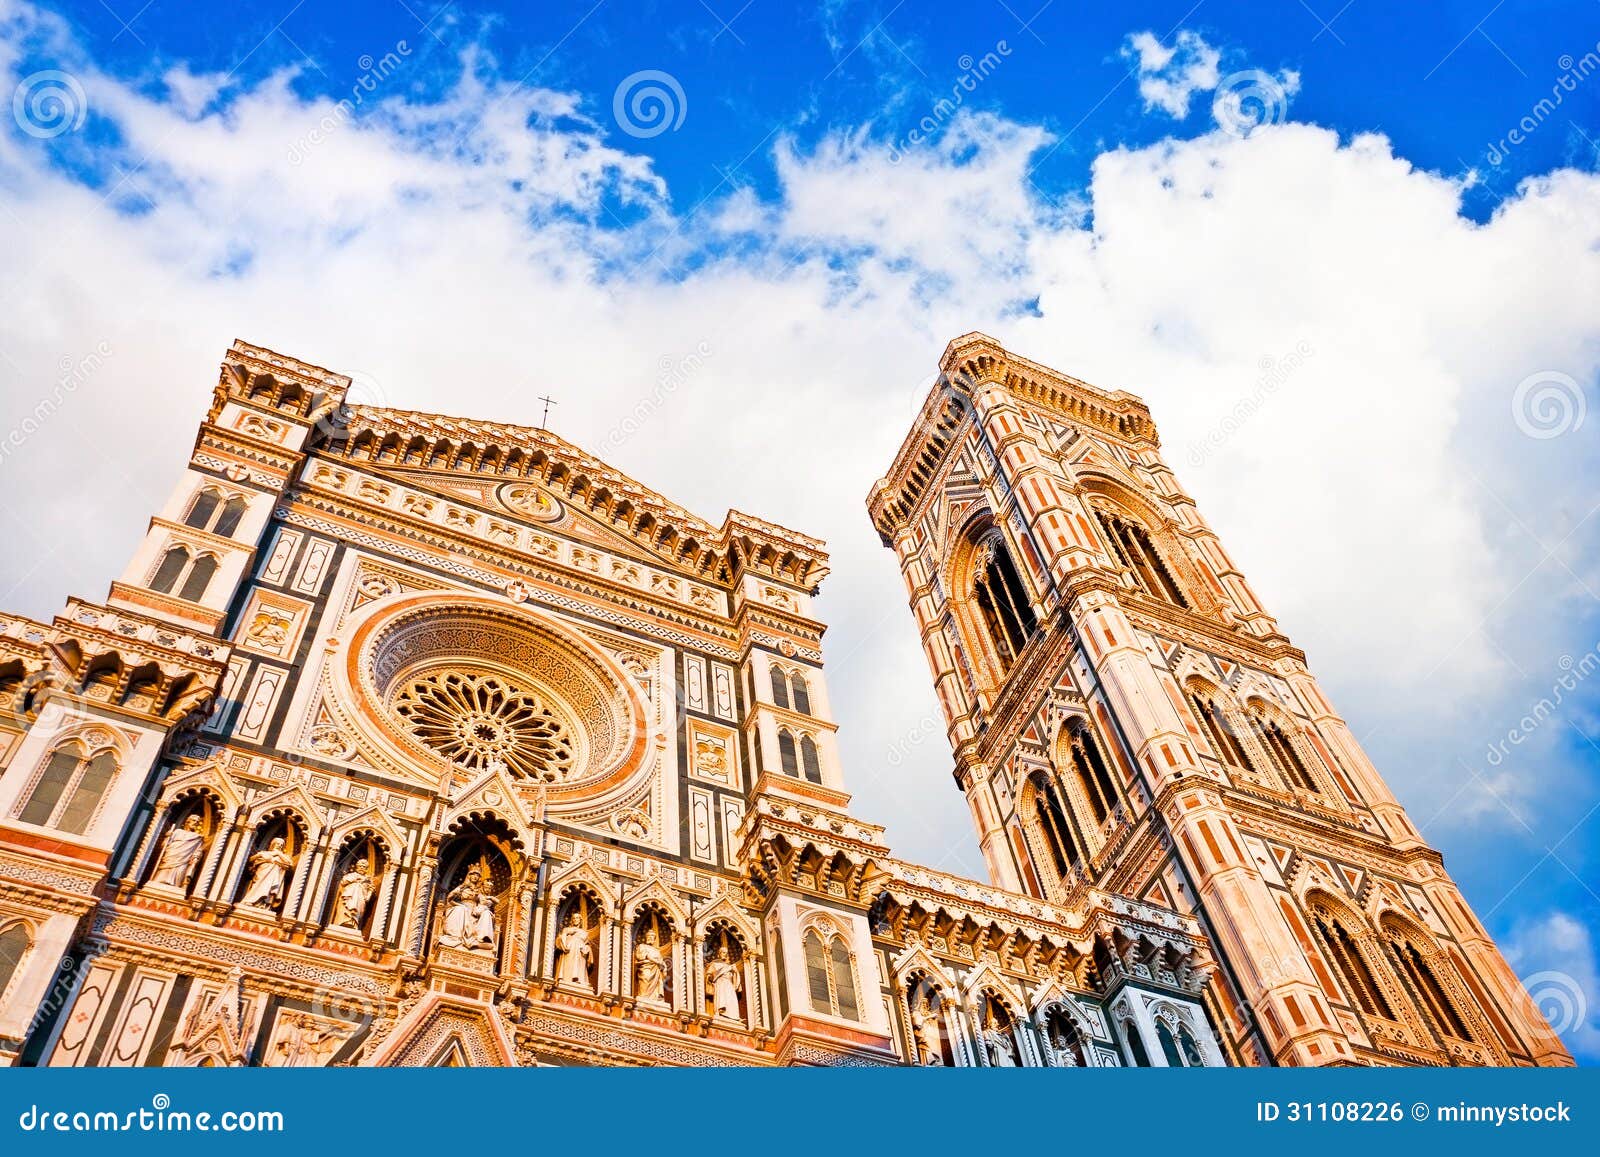 florence cathedral with giotto's campanile at sunset on piazza del duomo in florence, italy